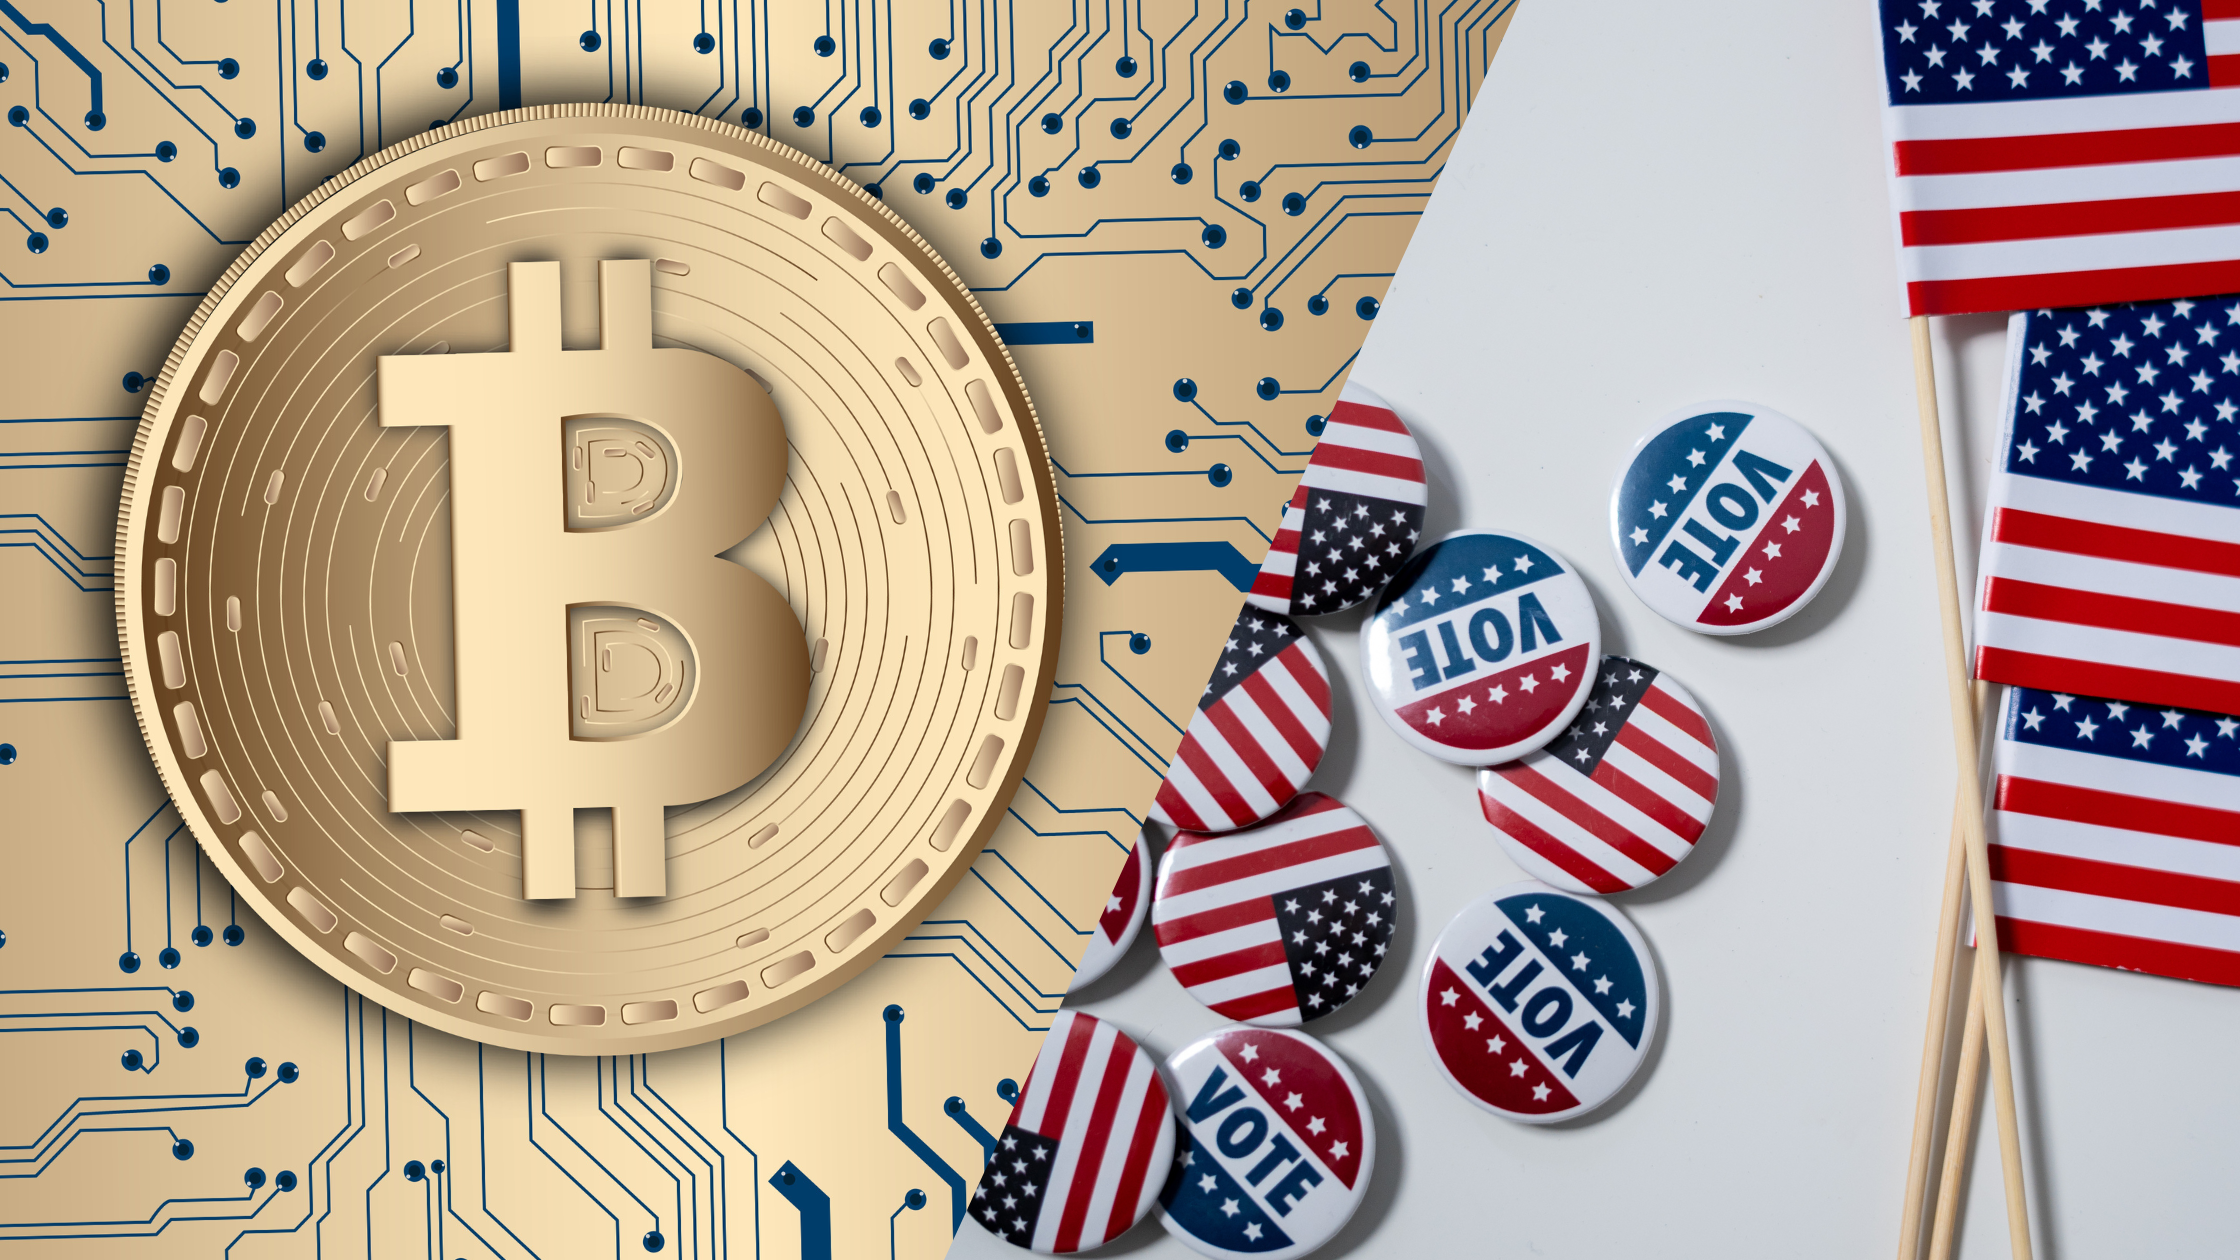 POST ELECTION - Bitcoin Looking to Break $16,500 in November?